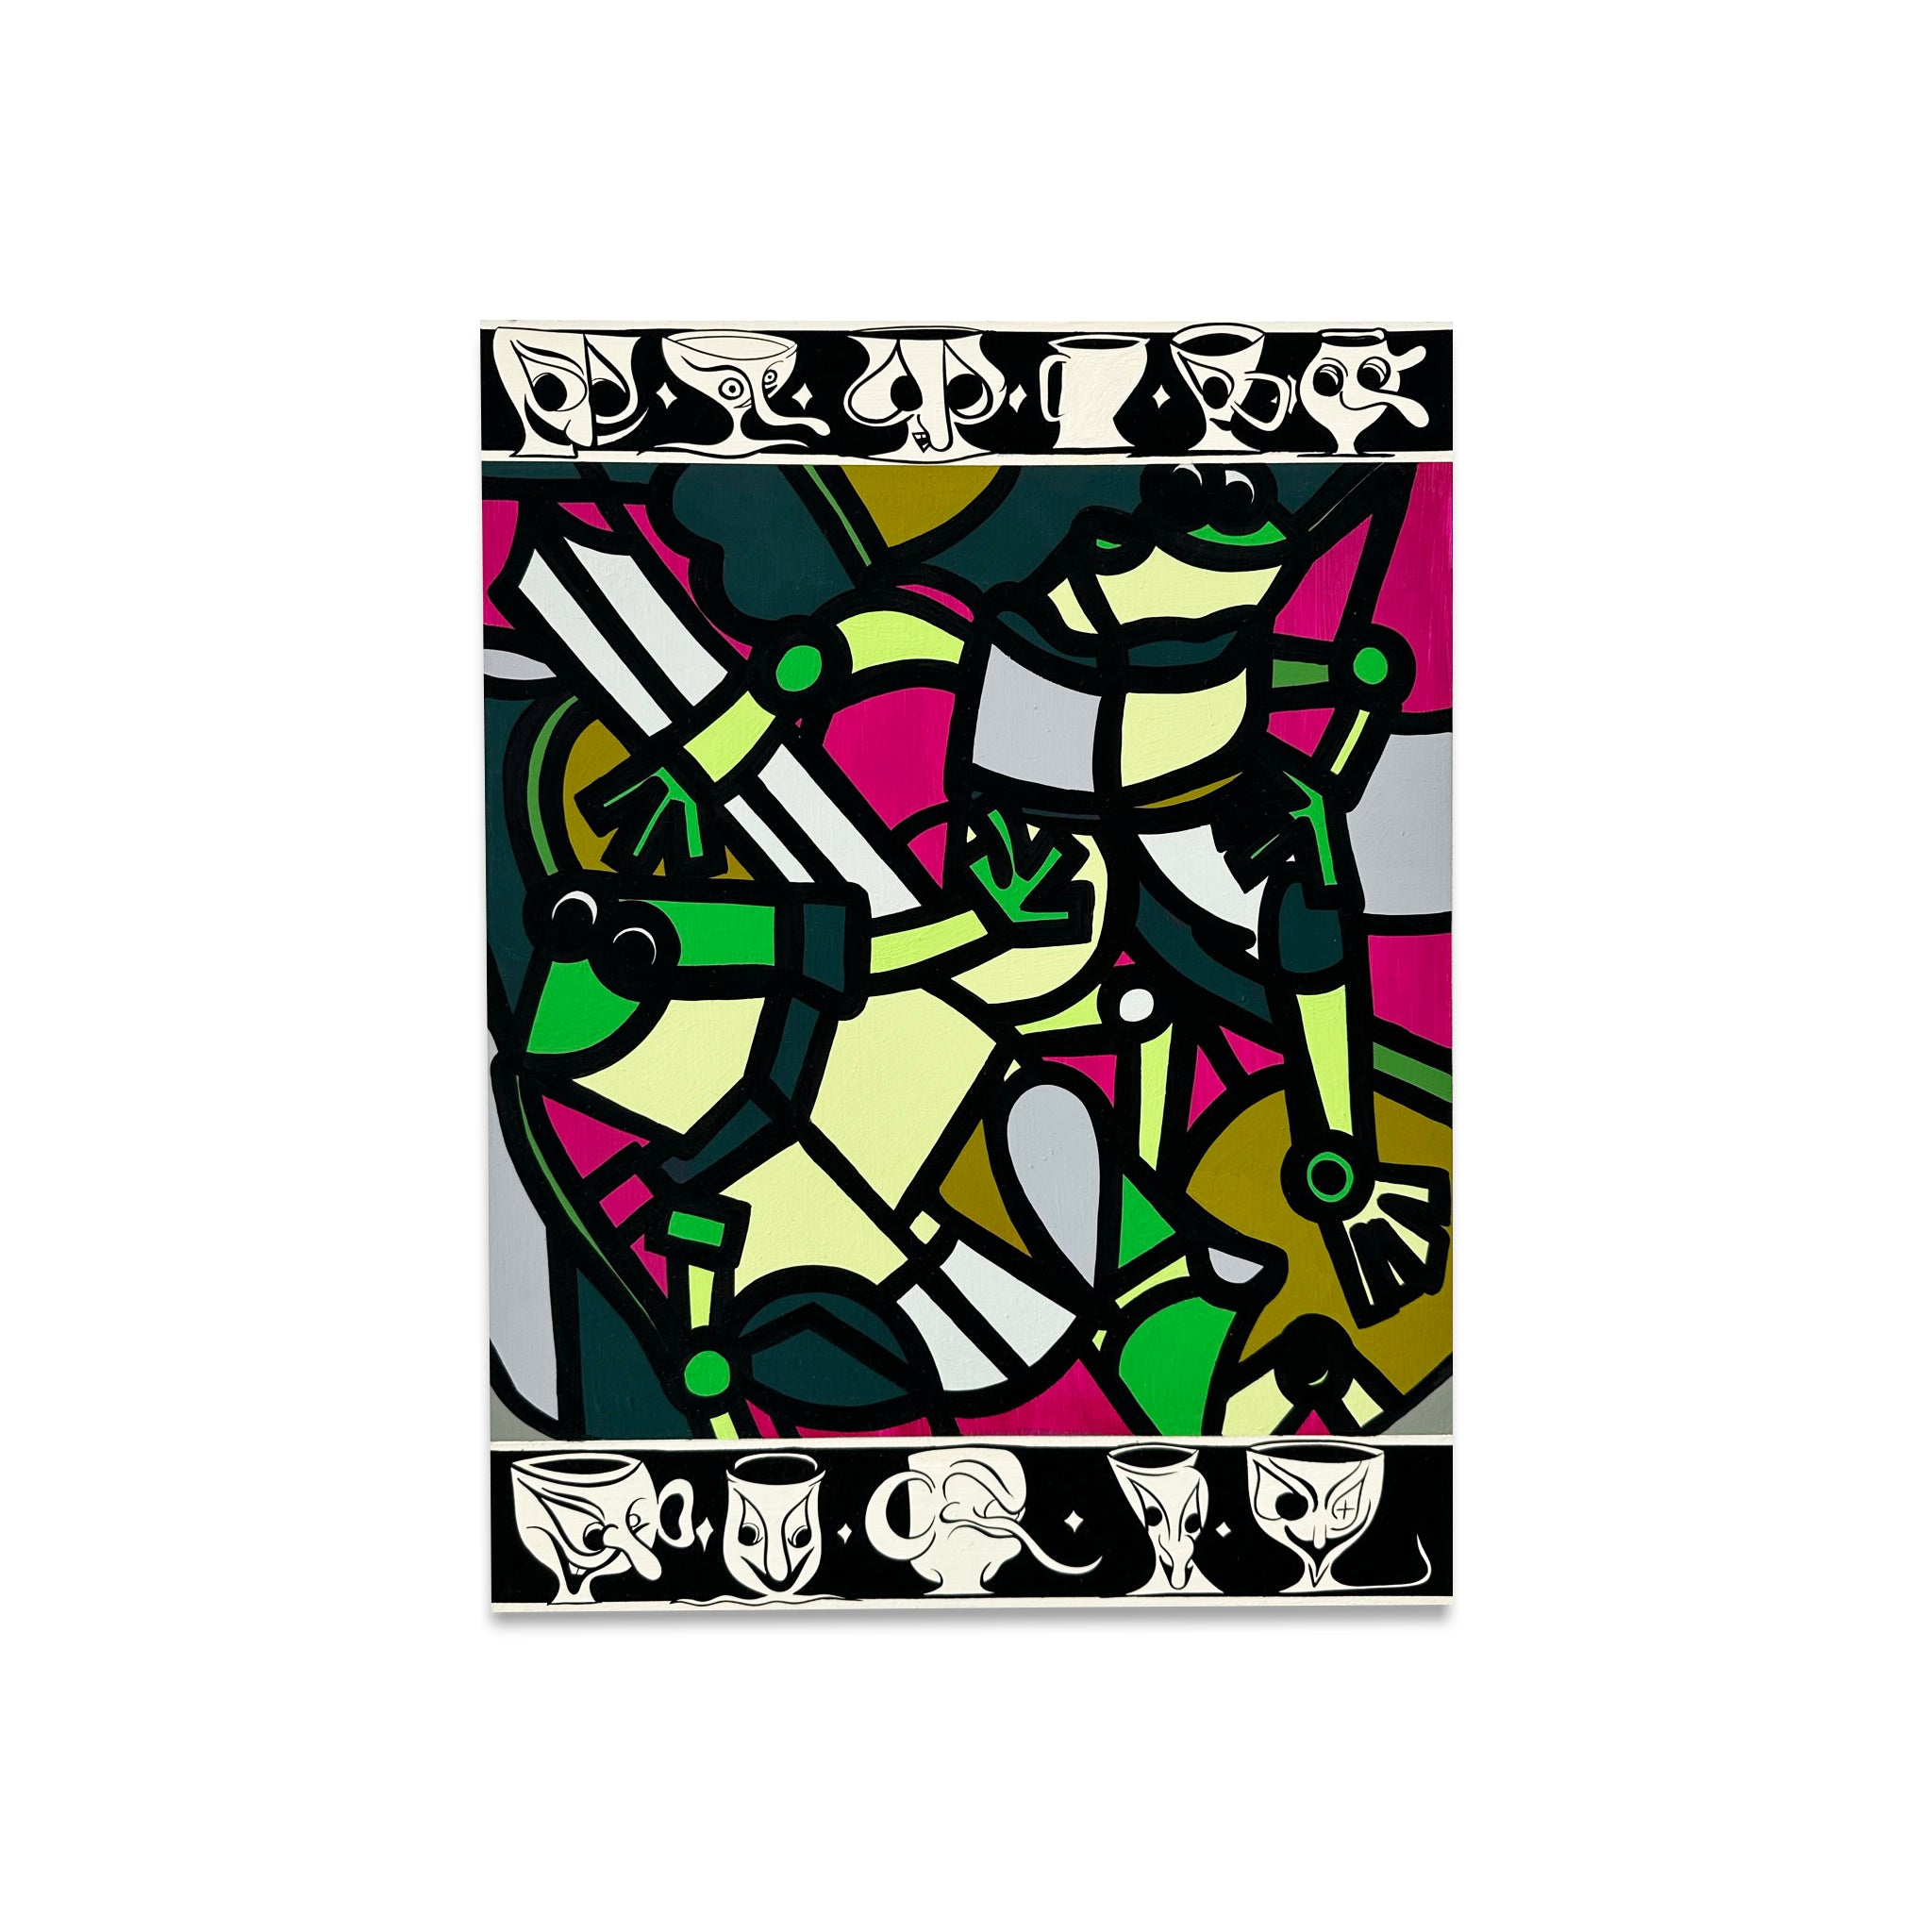 Chris Lux: Stained Glass Frog Battle